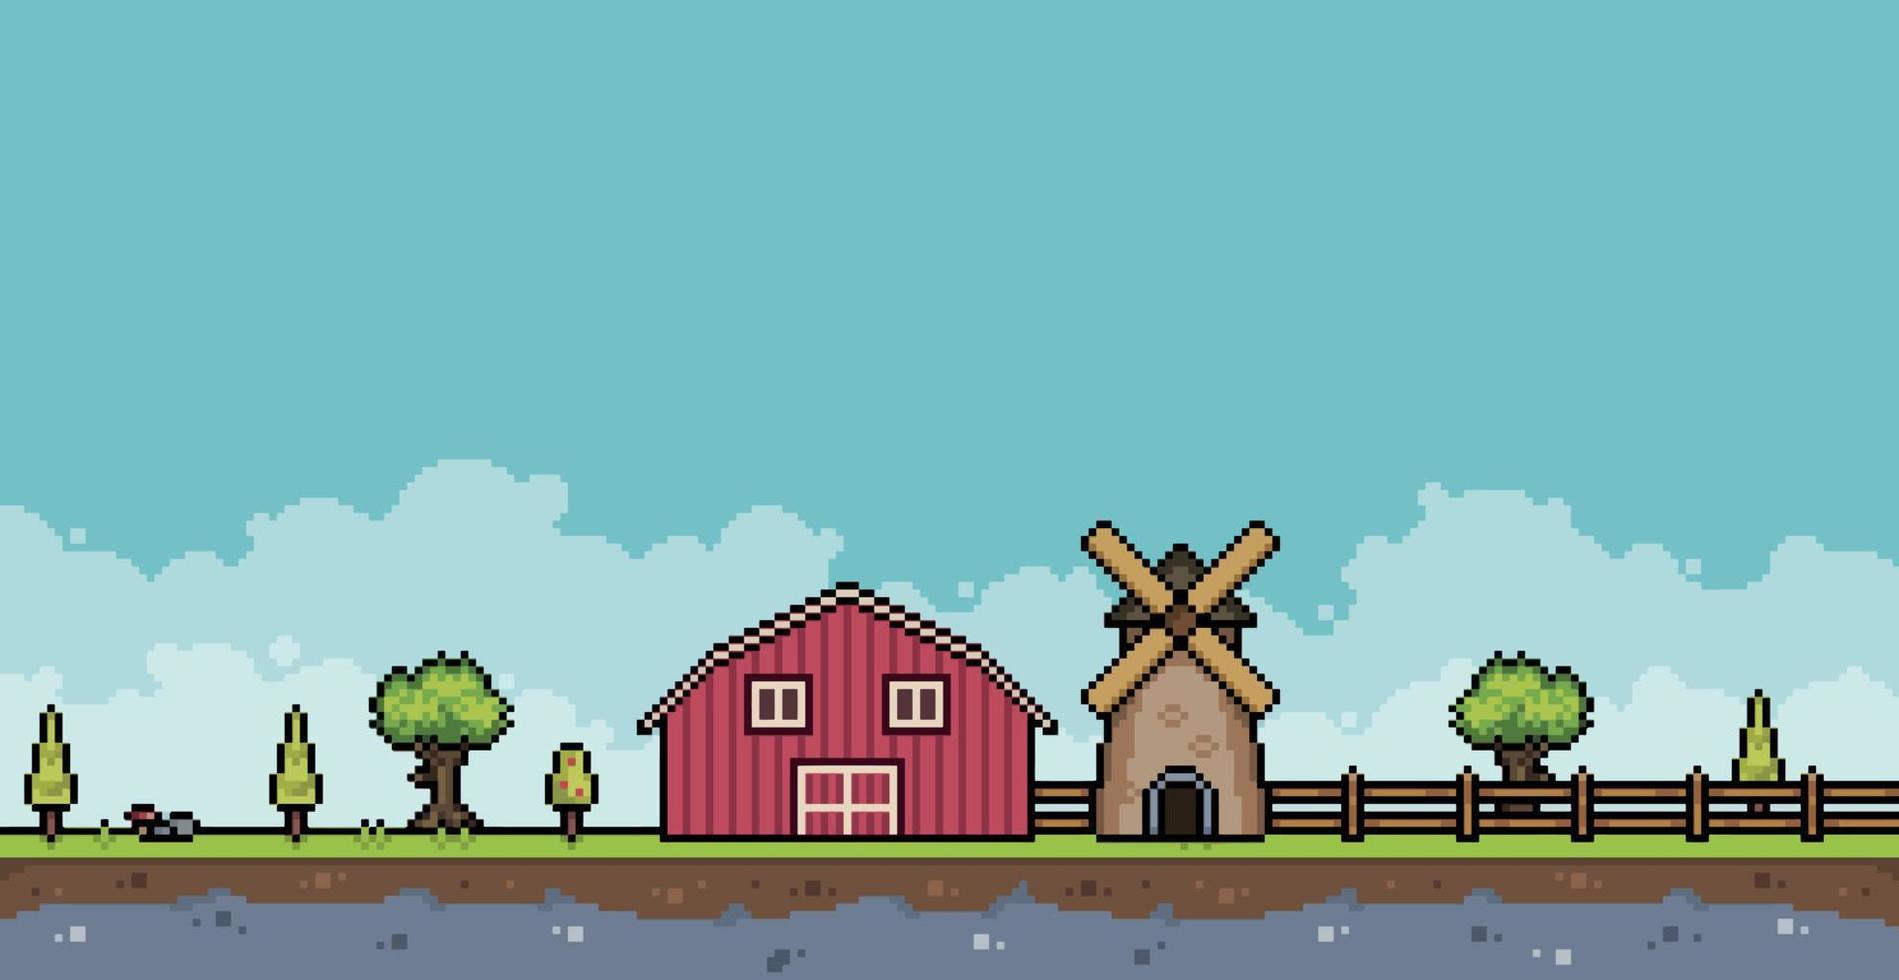 Pixel art farm landscape with barn, mill, fence, trees. 8 bit game background vector